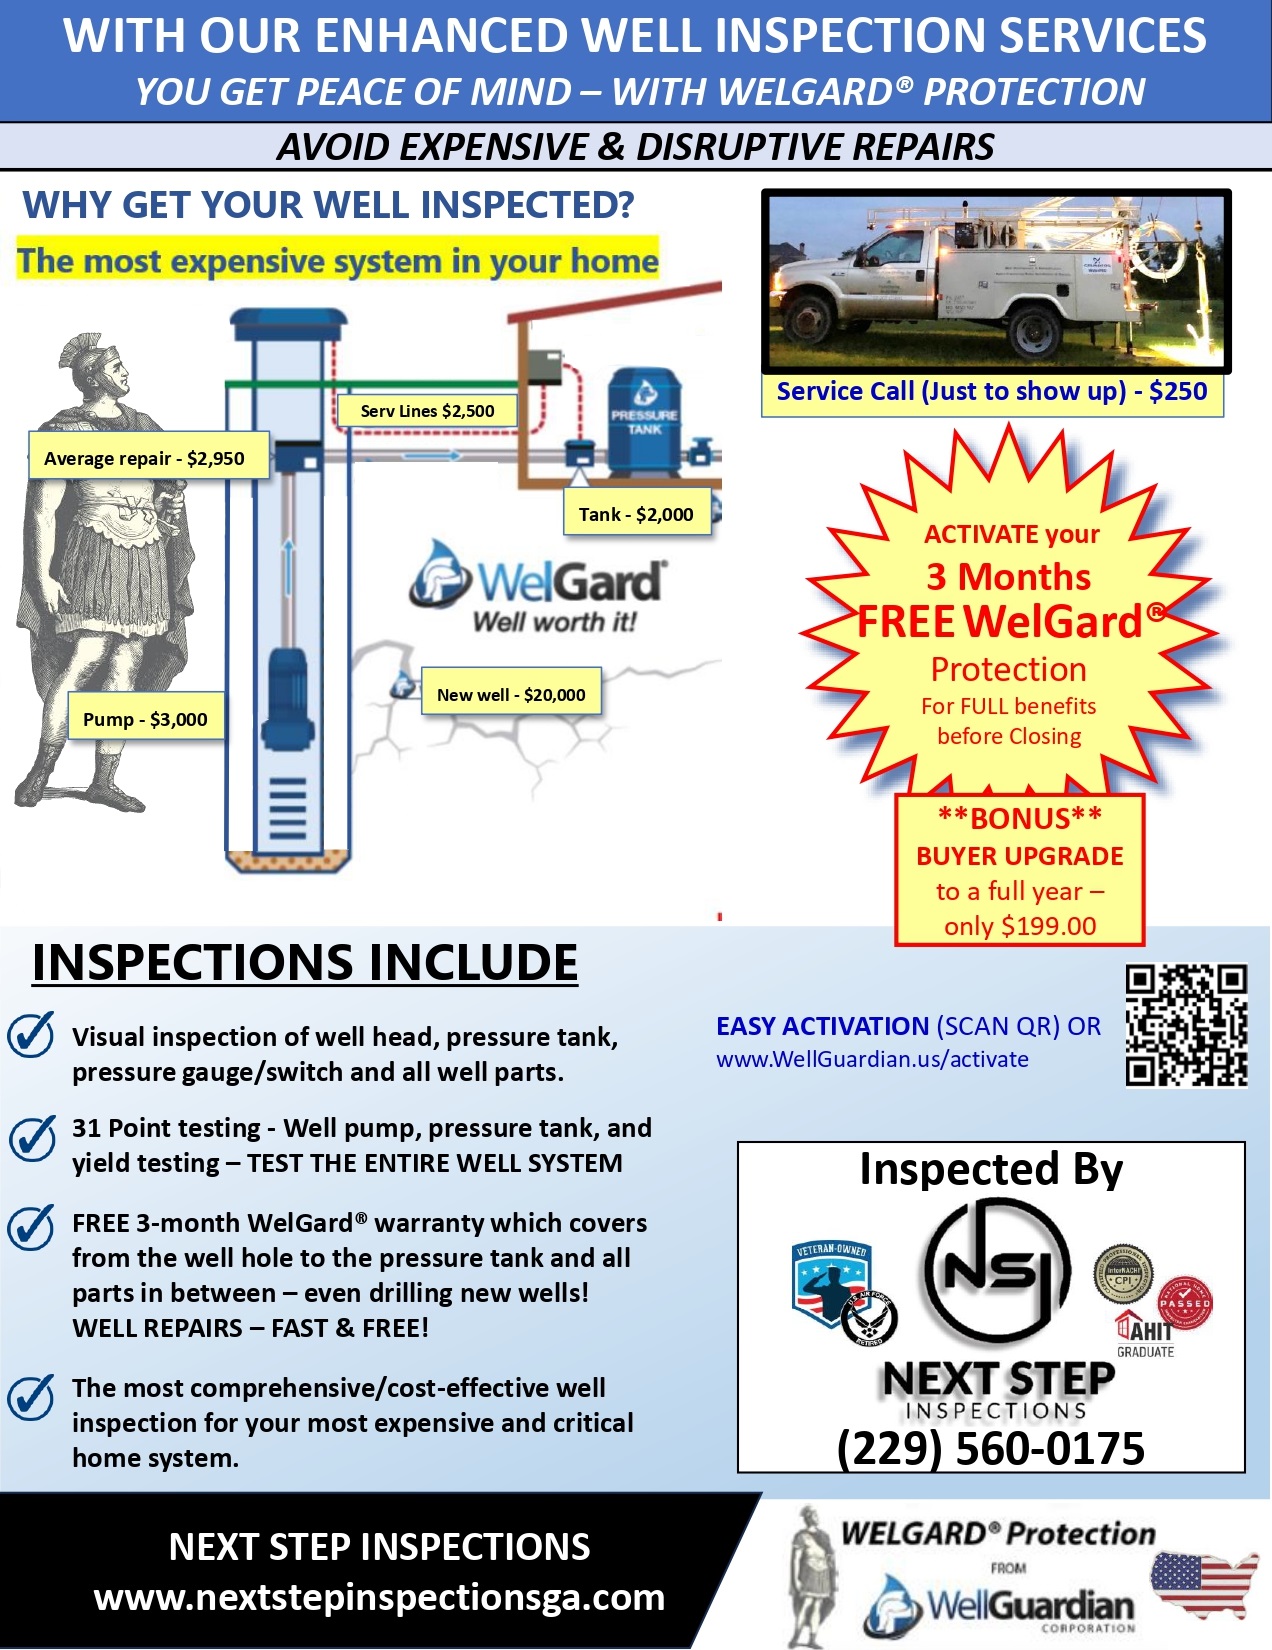 Next Step Inspections provide Well Inspections to give you peace of mind and ensure your water is safe